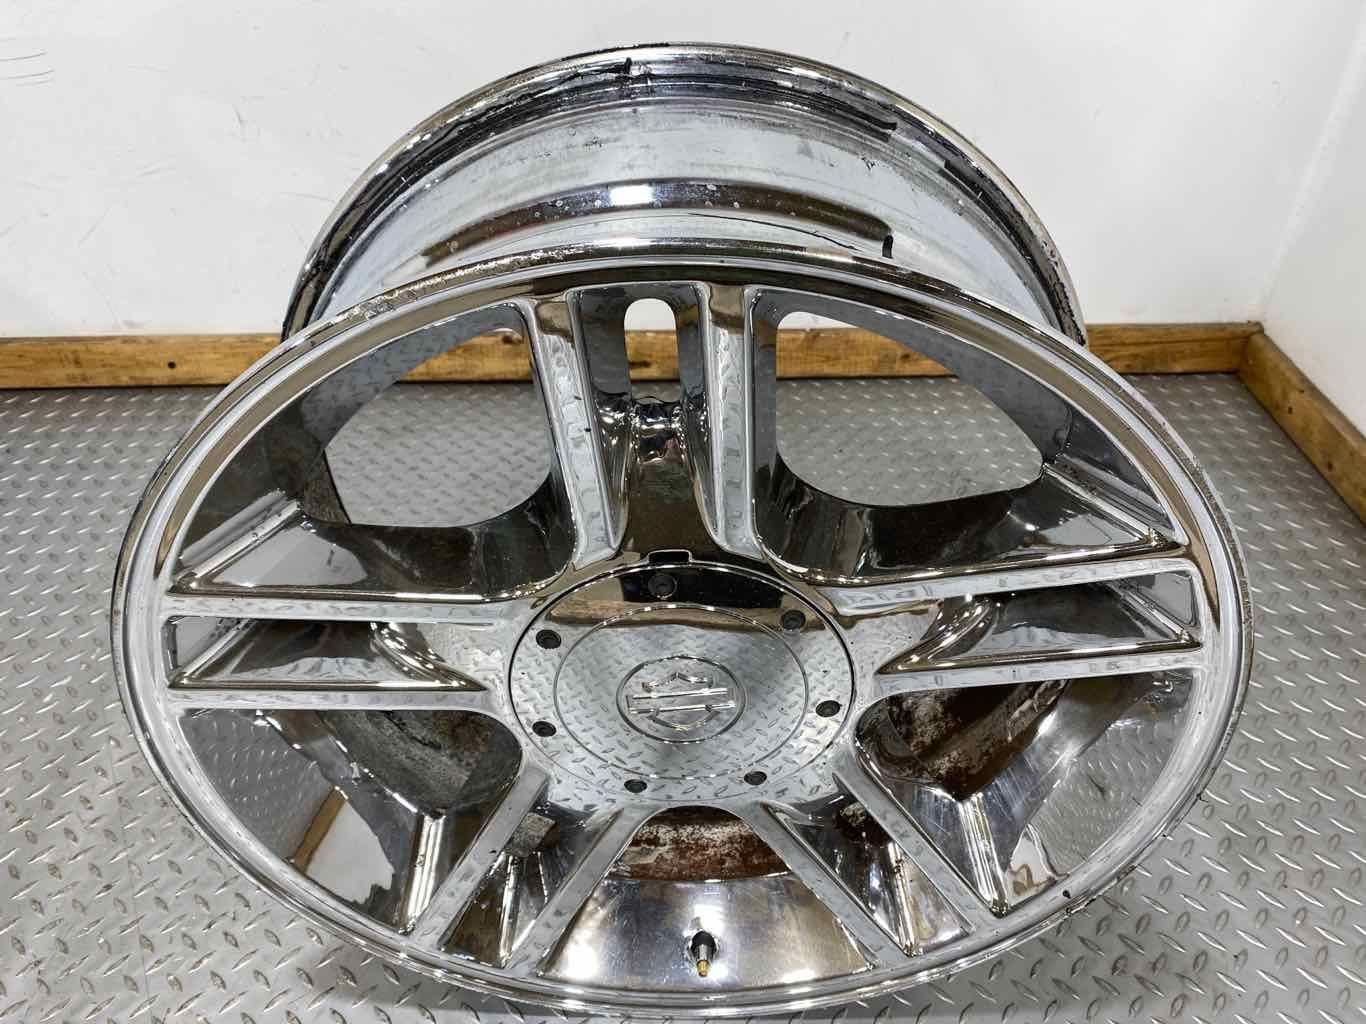 00-03 Ford F150 Harley-Davidson Pkg CORE Set of 4 20x9 Wheels Poor Condition